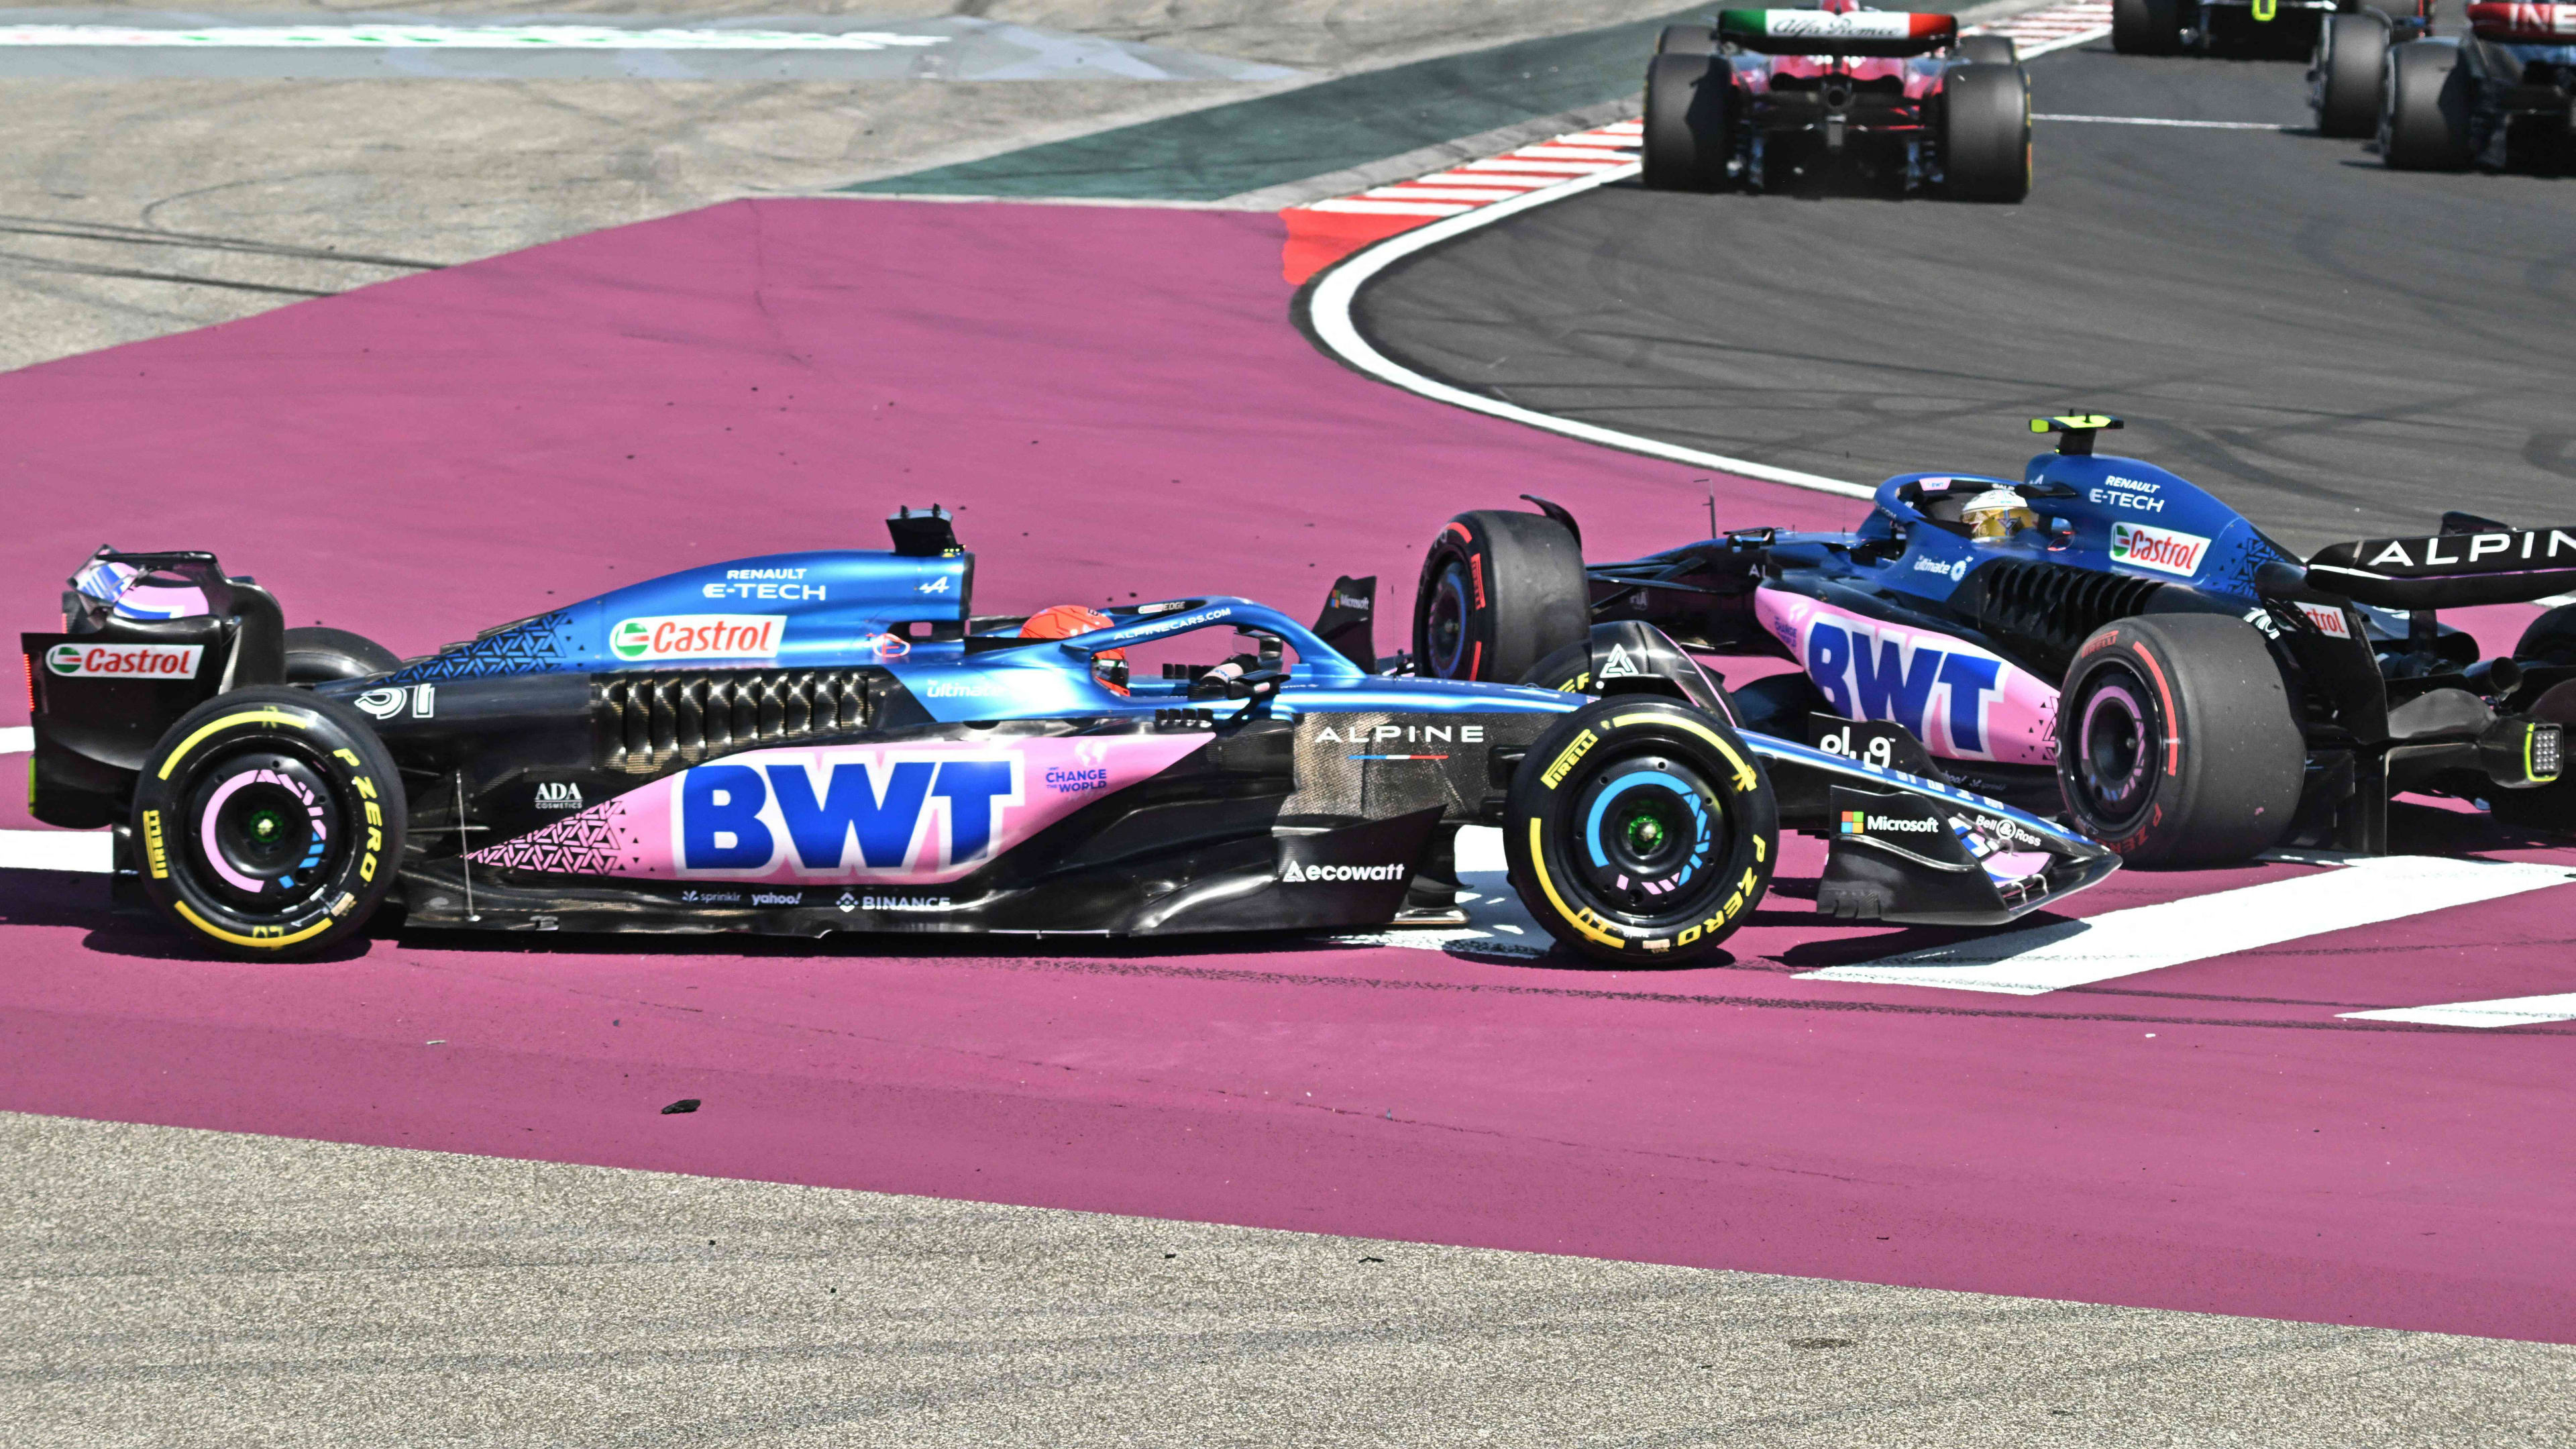 My seat broke in pieces' – Ocon reveals the damage caused by first lap collision in Budapest that forced him and Gasly to DNF | Formula 1®